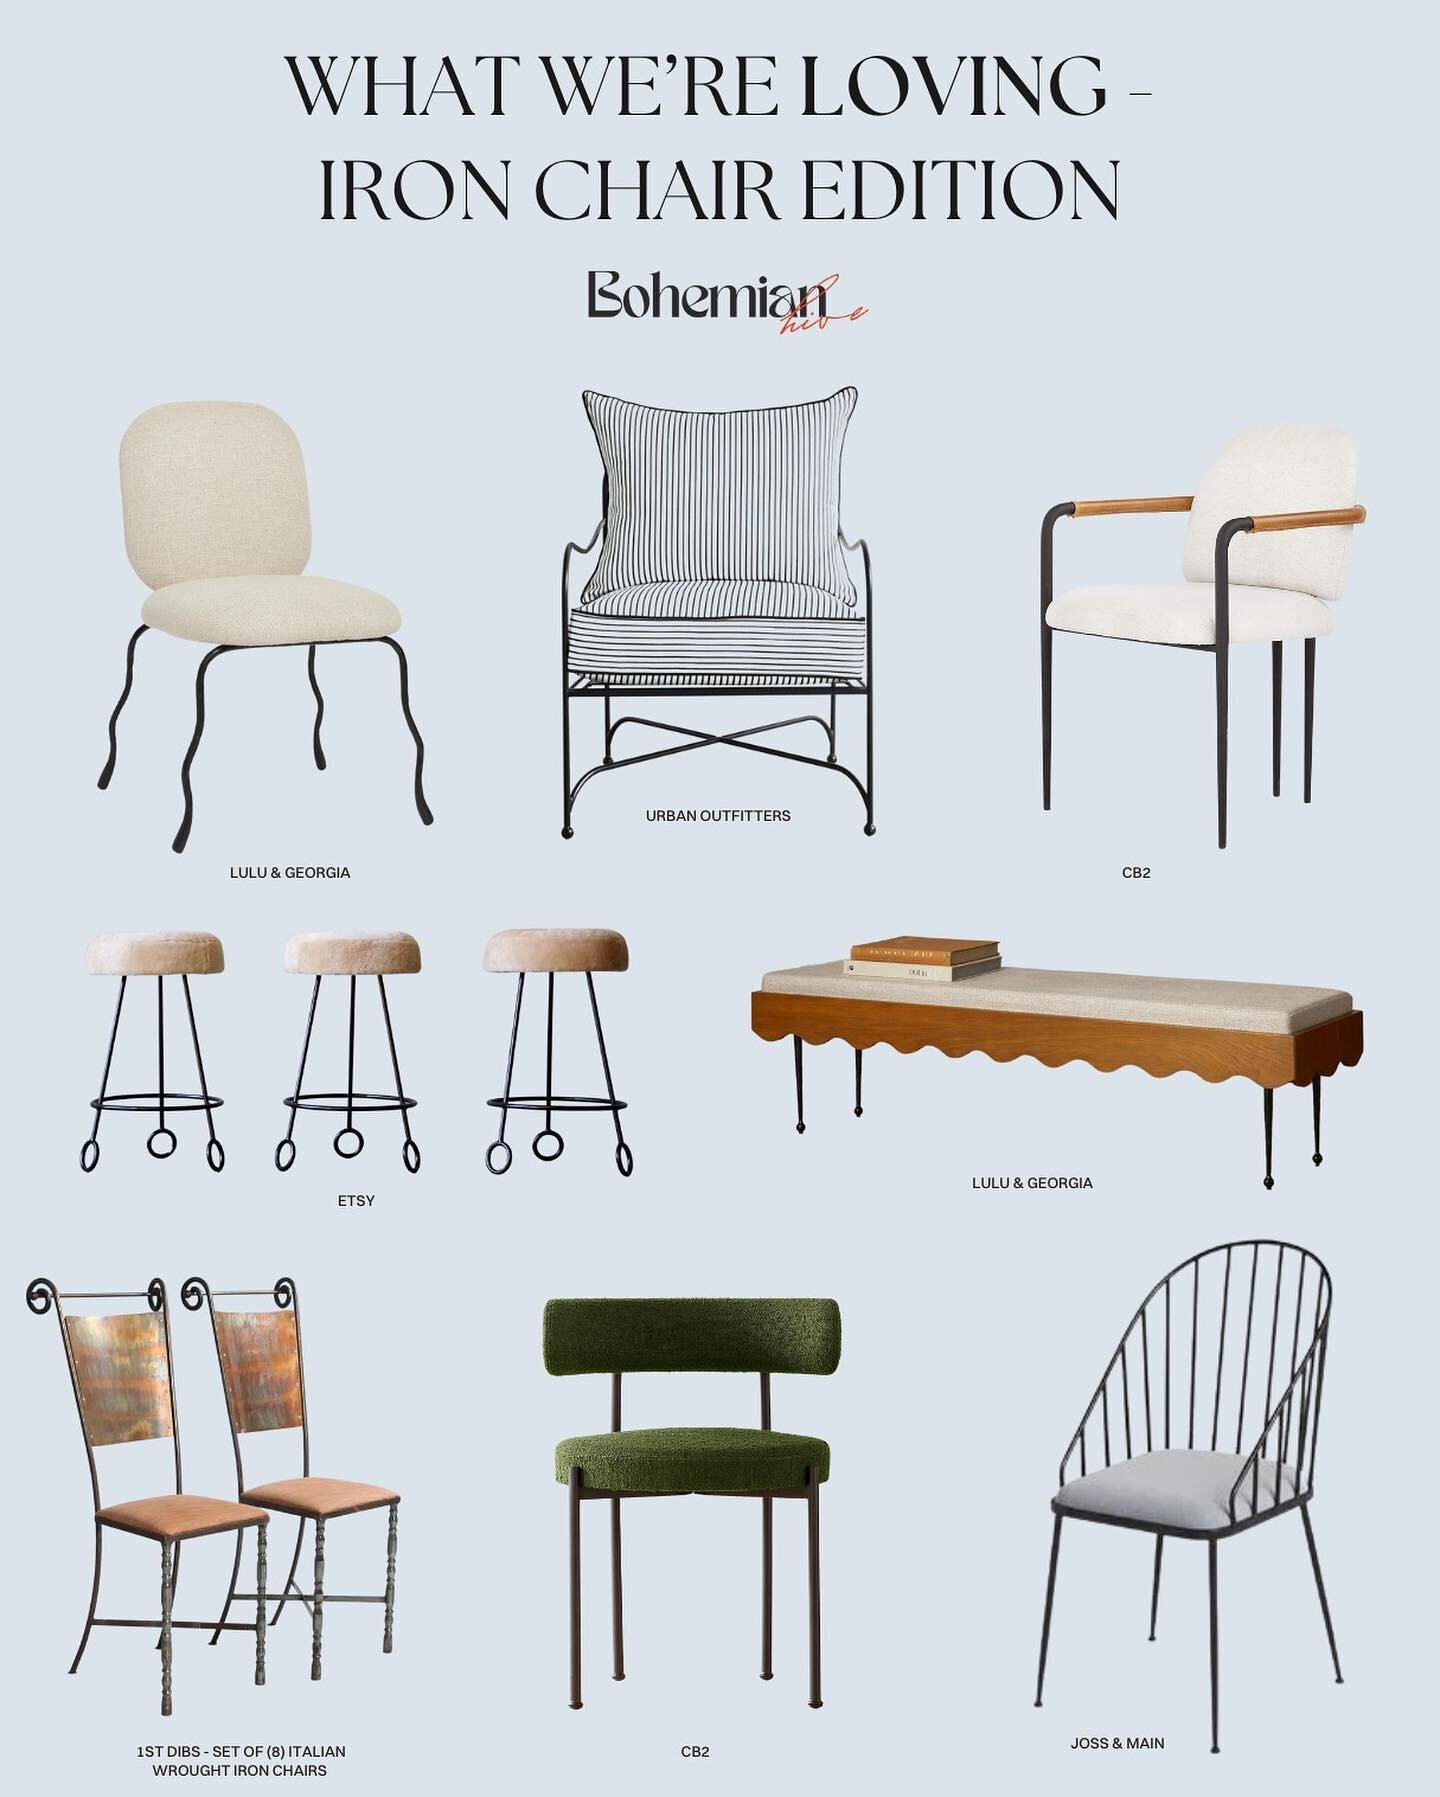 Cast Iron, Aluminum and Steel. Metal furniture has been around for centuries. In fact, a 1996 book on the history &amp; artistry of metal furniture described an iron chair used in ancient Roman times.  Once, Iron furniture was the hallmark of vintage